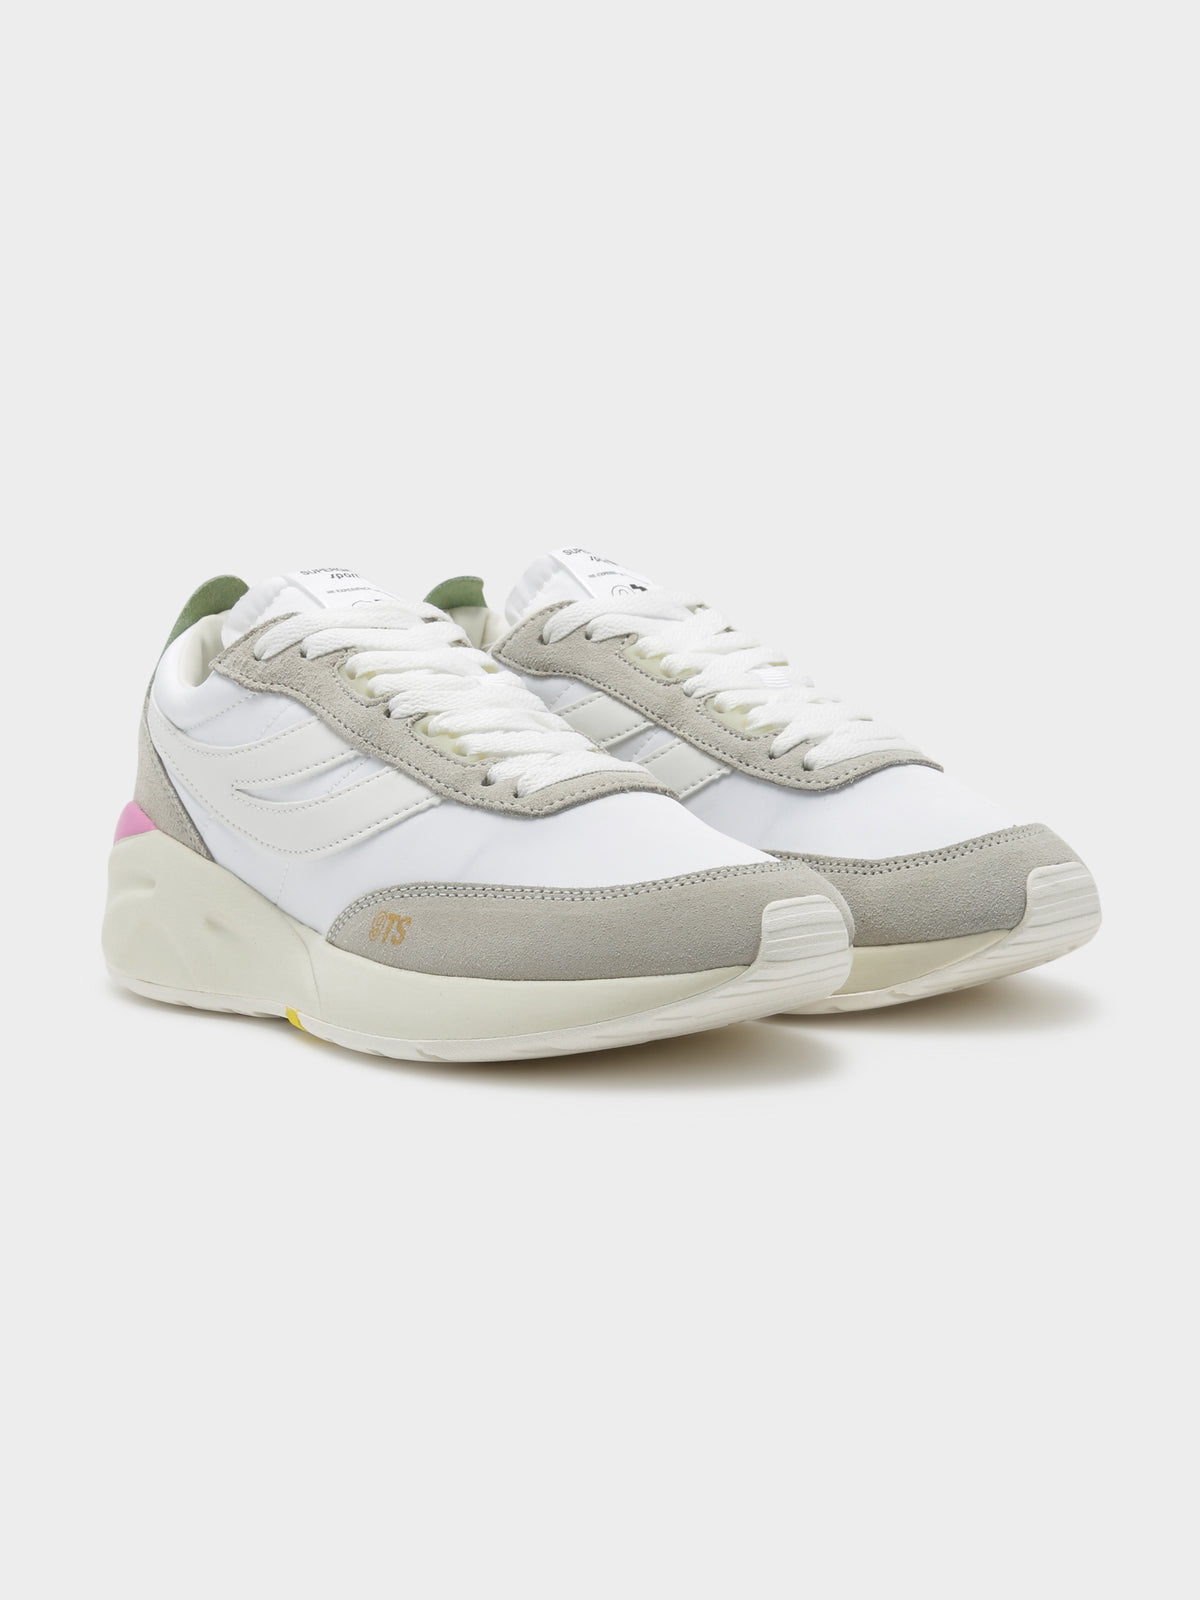 Unisex 4089 Training 9T Sneakers in White &amp; Pink